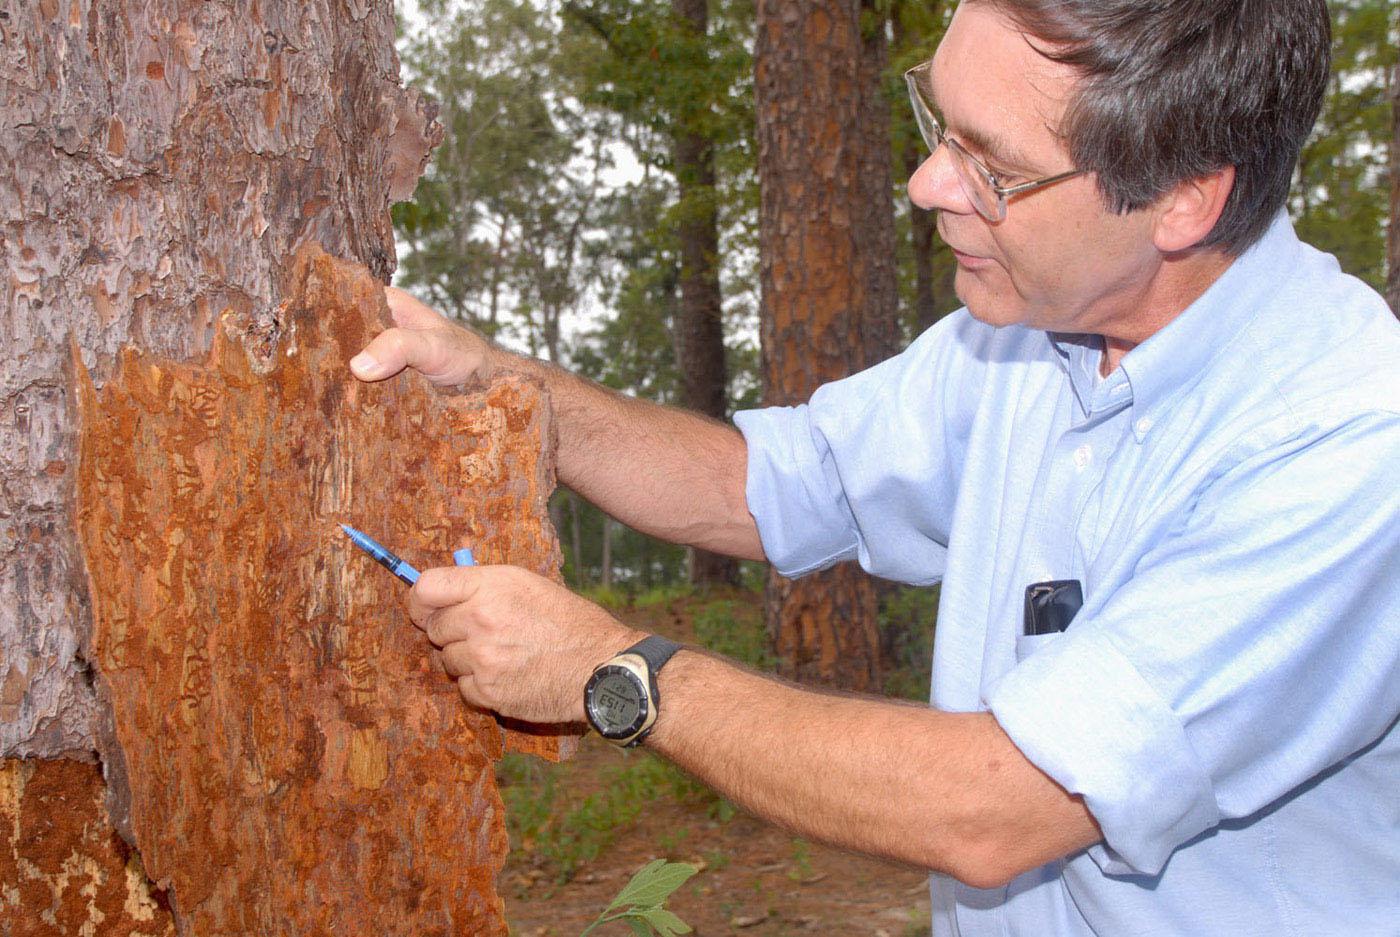 Glenn Hughes, a forestry specialist with Mississippi State University's Extension Service, points to the damage from pine bark beetles that are destroying this tree at Elks Lake in Forrest County. (Photo by Marco Nicovich)  